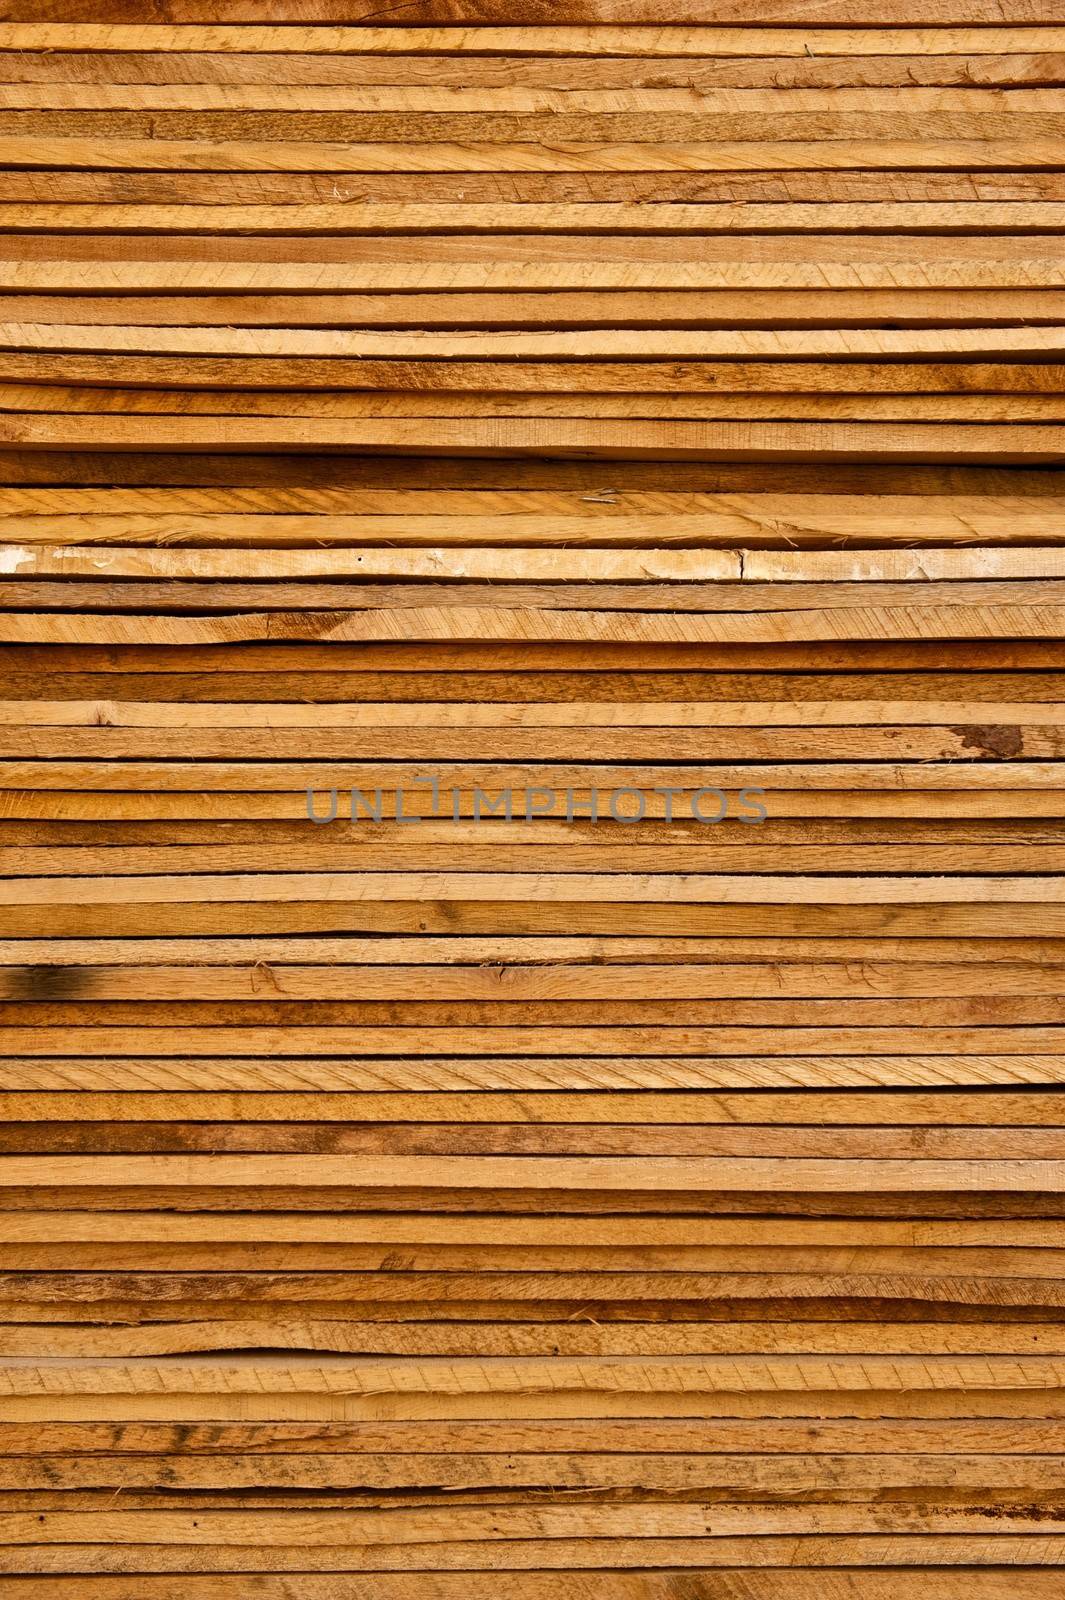 Stack of Rough Cut Wood Lumber by pixelsnap